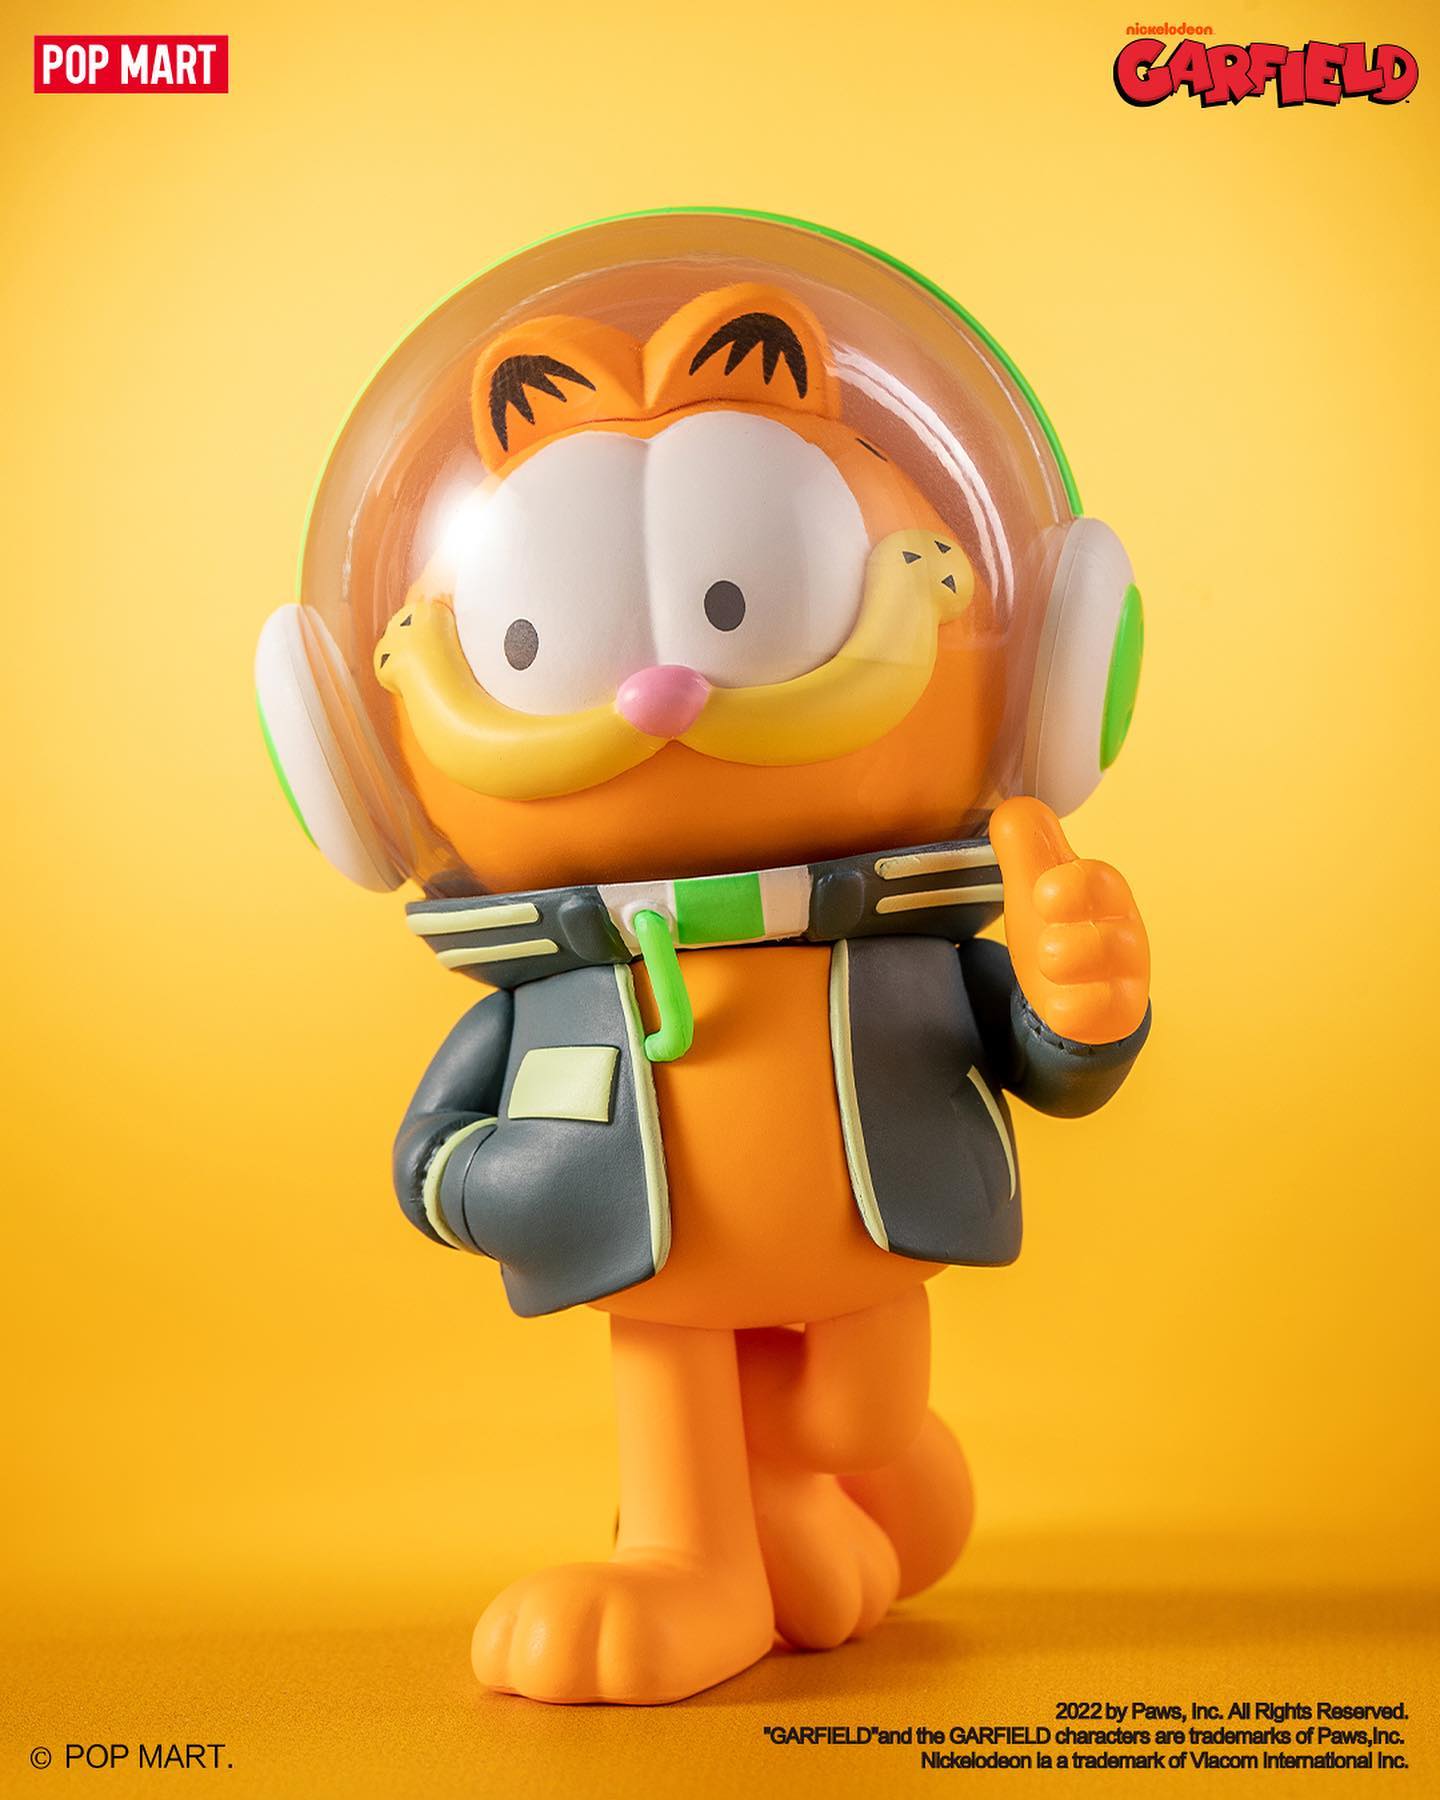 Toy figurine of a cat wearing a helmet and headphones from Garfield Future Fantasy Blind Box Series by Pop Mart.